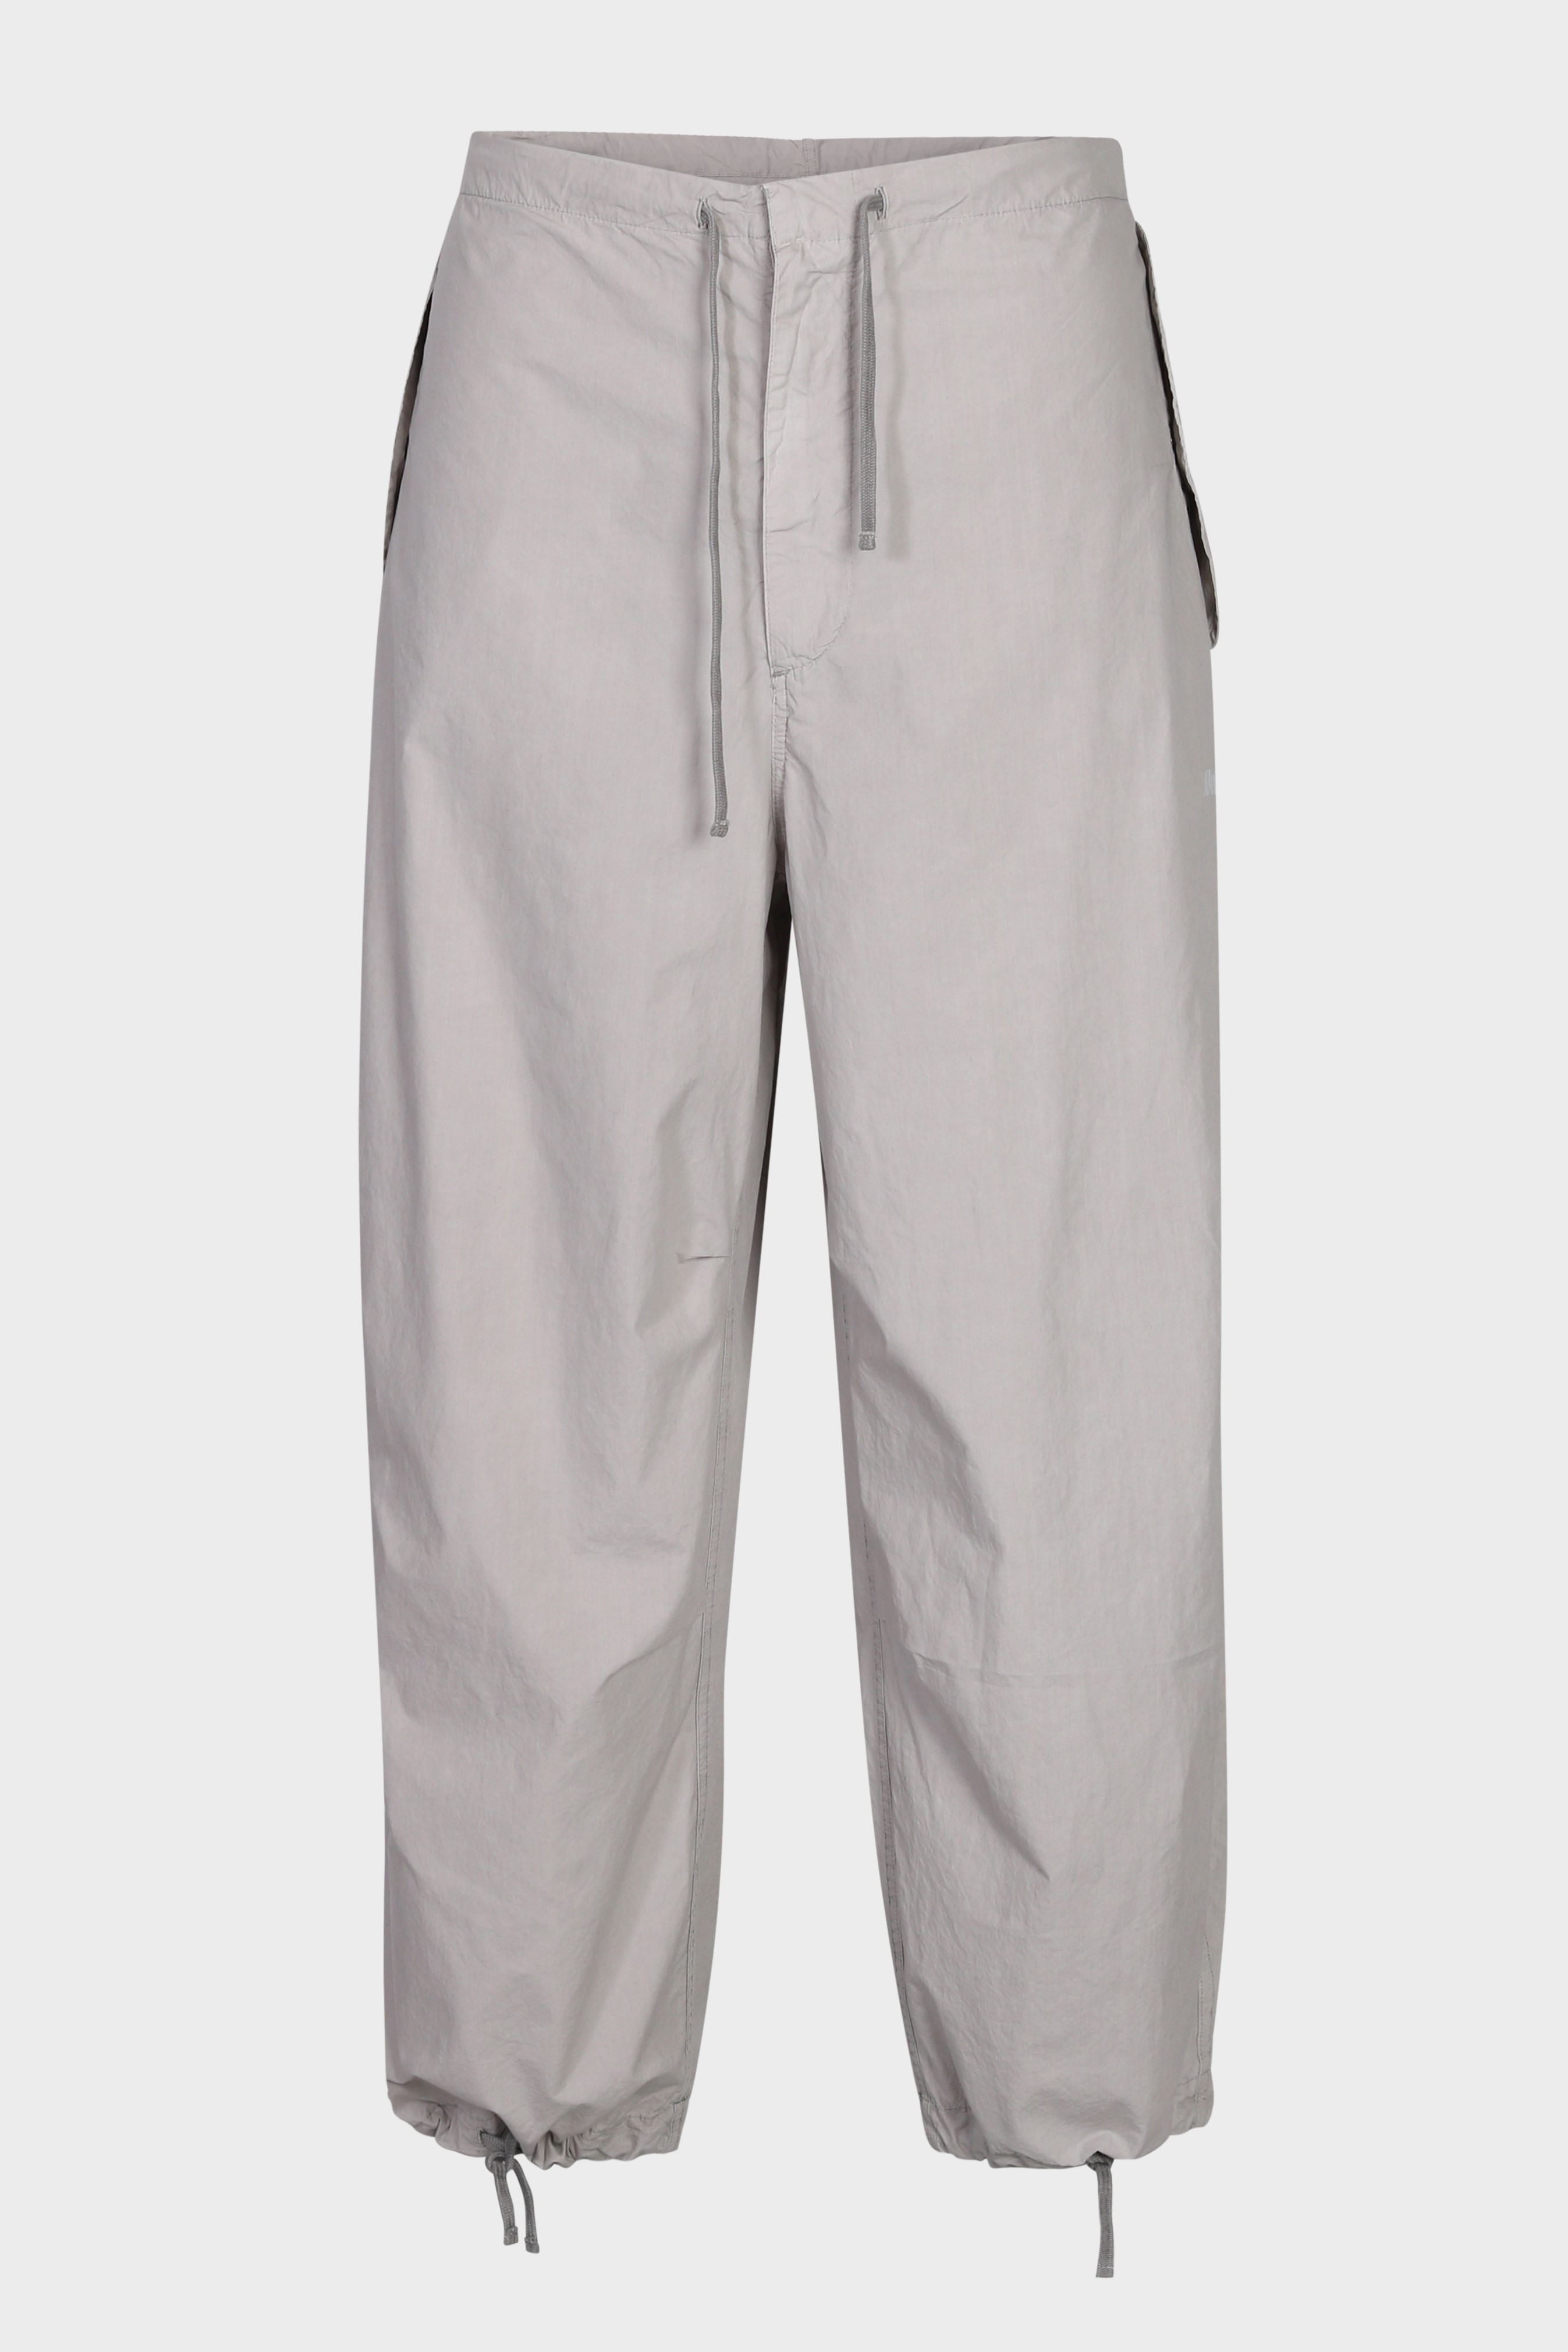 AUTRY ACTION PEOPLE Track Pant in Grey S